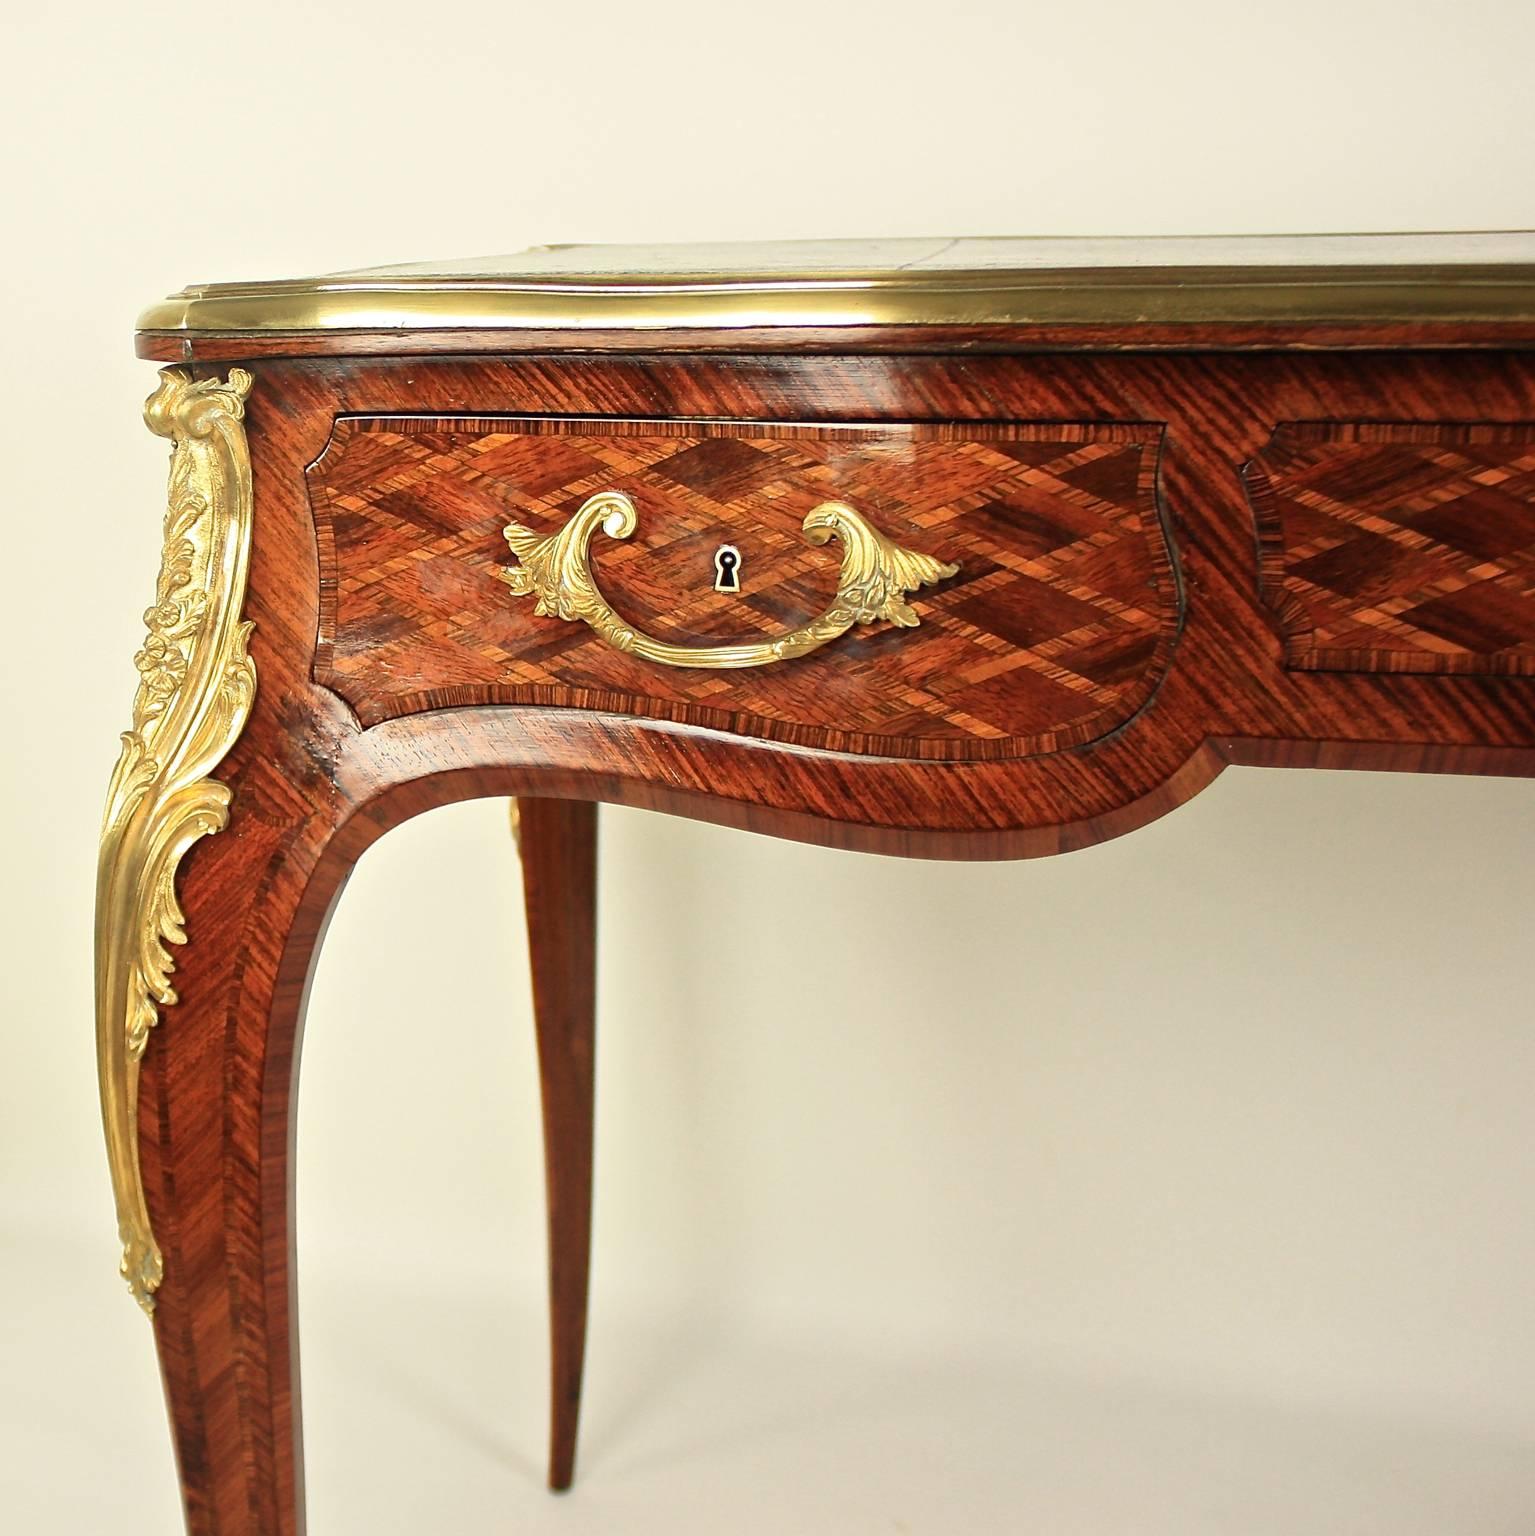 19th Century Small Louis XV Style Gilt Bronze Mounted Marquetry Bureau Plat or Desk